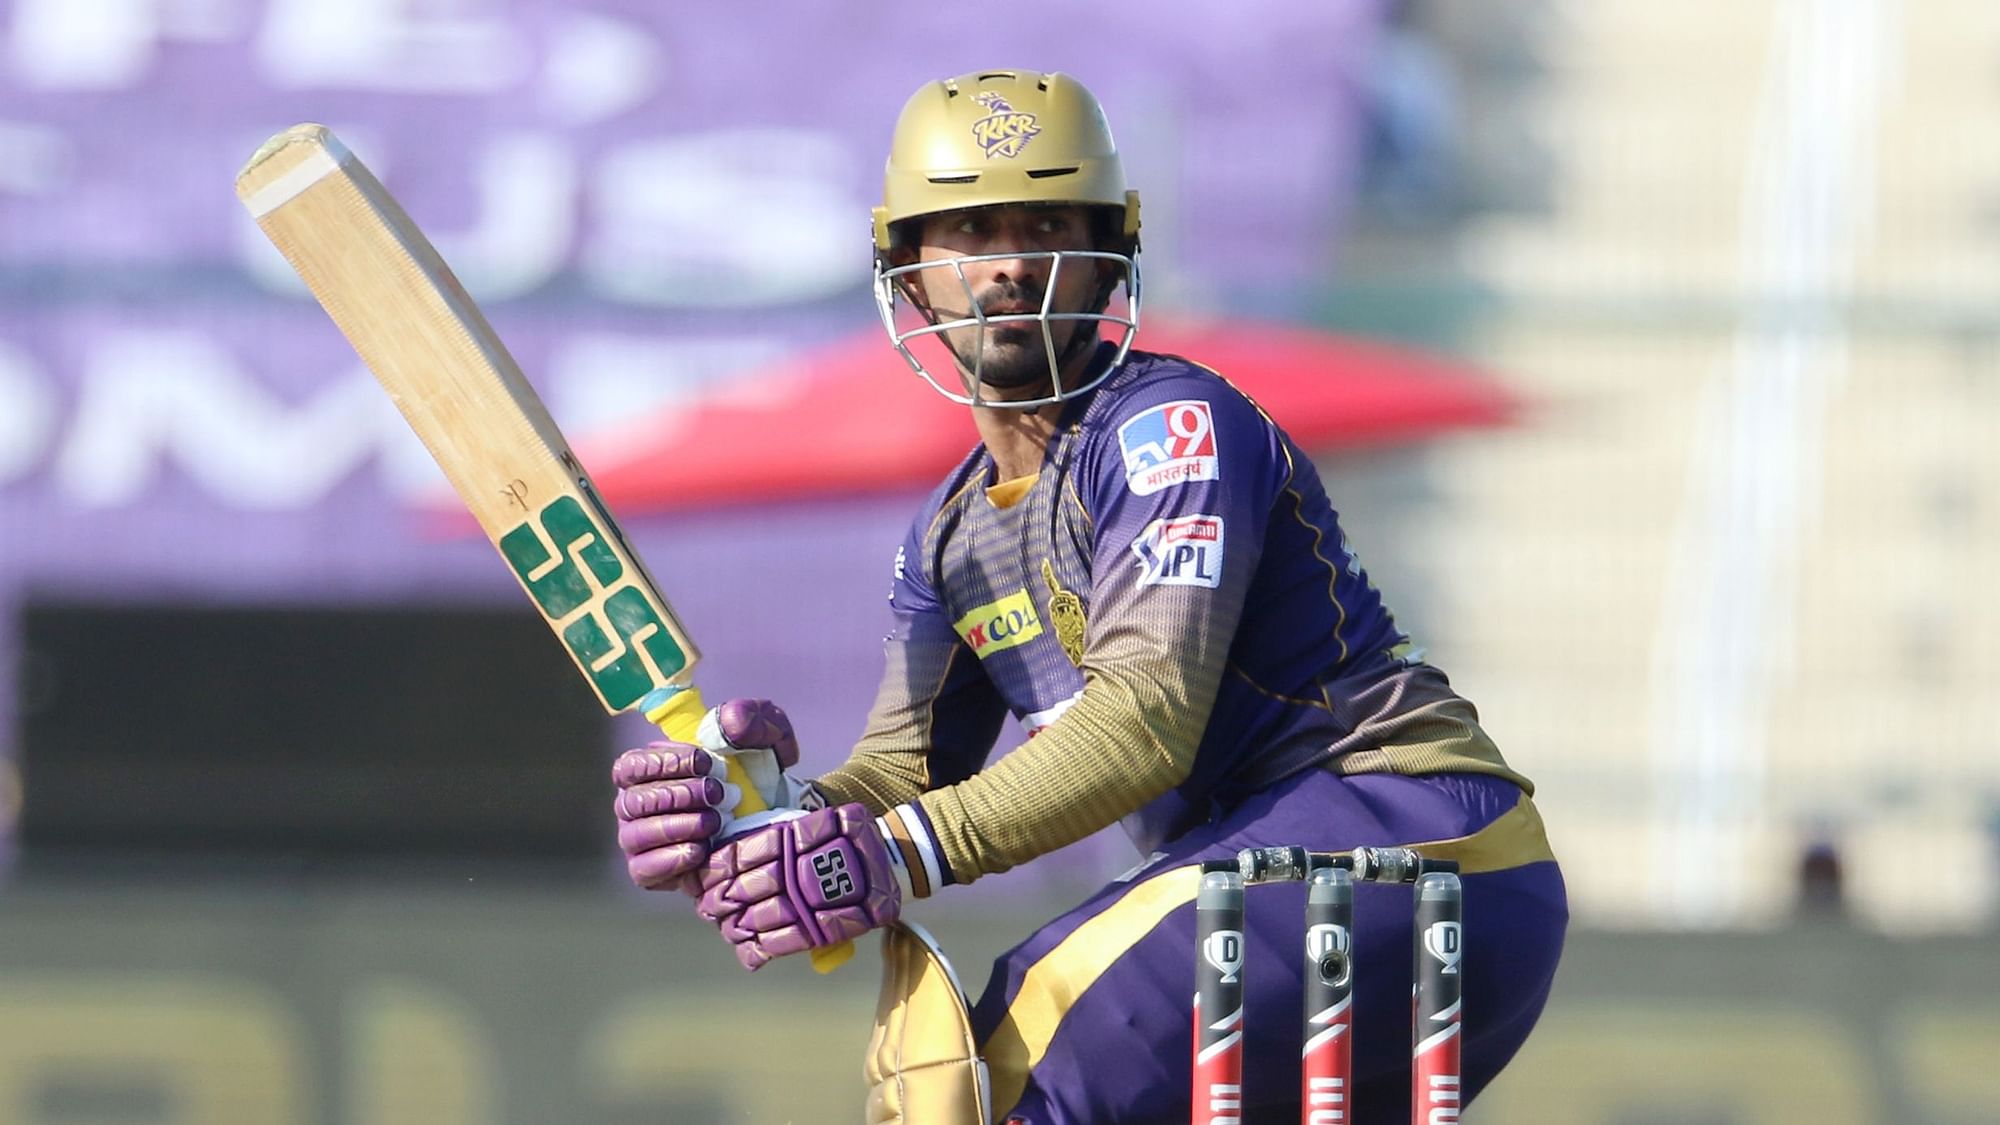 Kolkata Knight Riders (KKR) captain Dinesh Karthik finally found form with the bat as he smashed 58 off 29 balls.